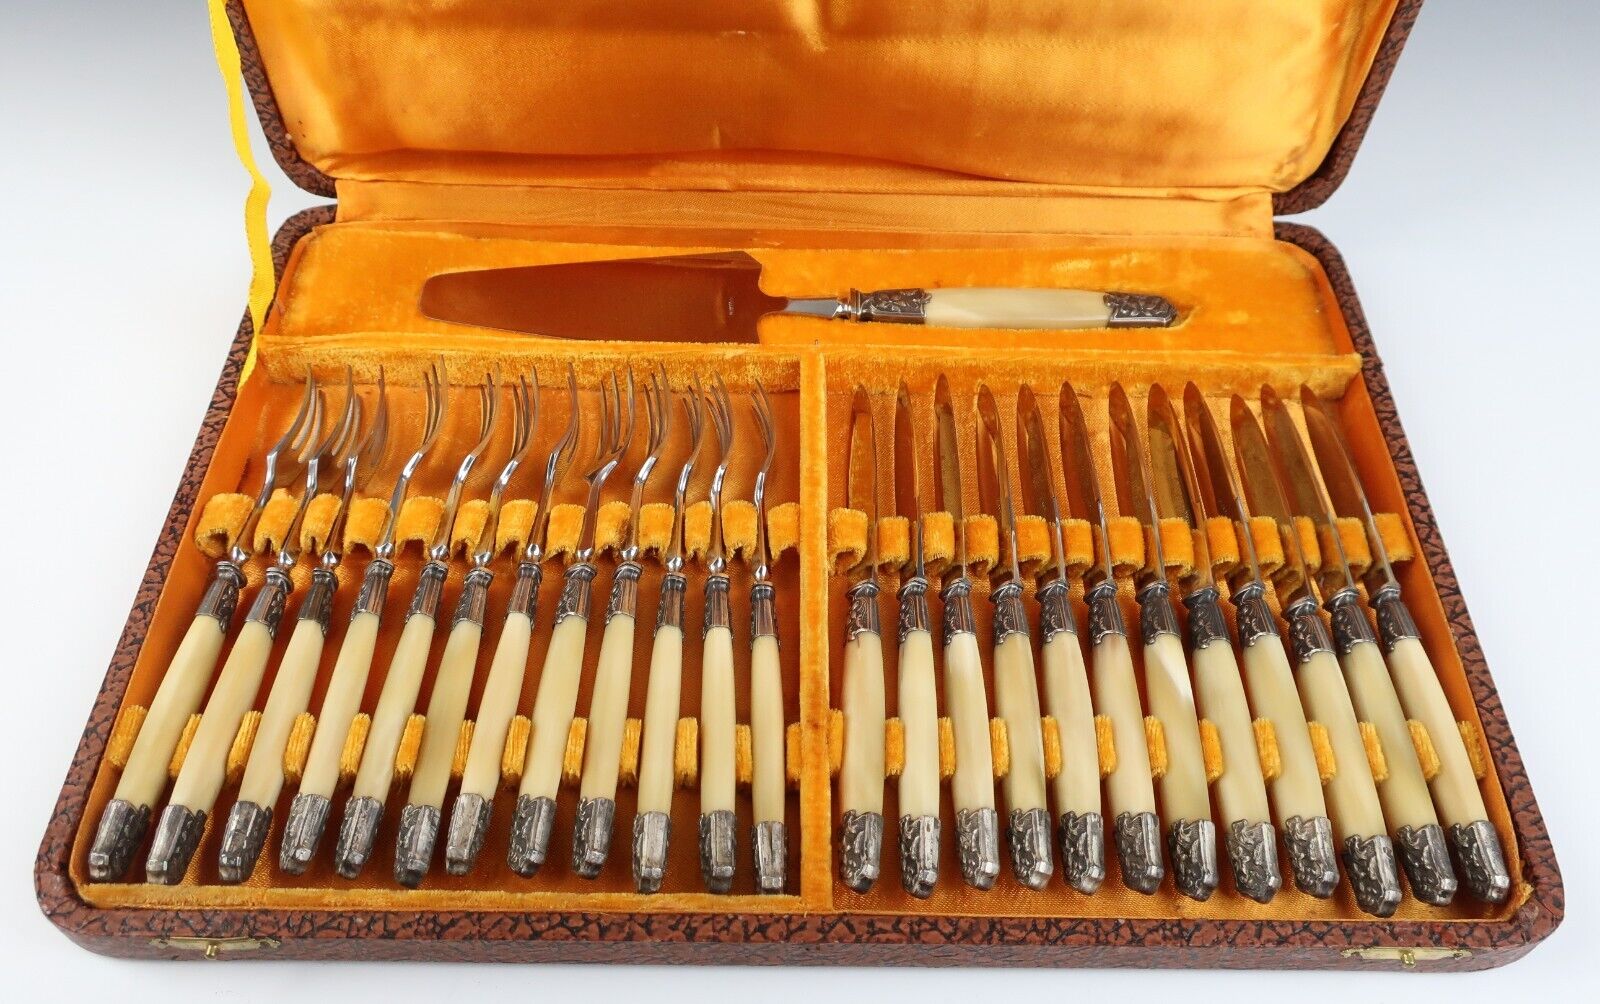 Vintage 25pc French Horn & Silver or Silverplate Fish Forks Knives Serving Set